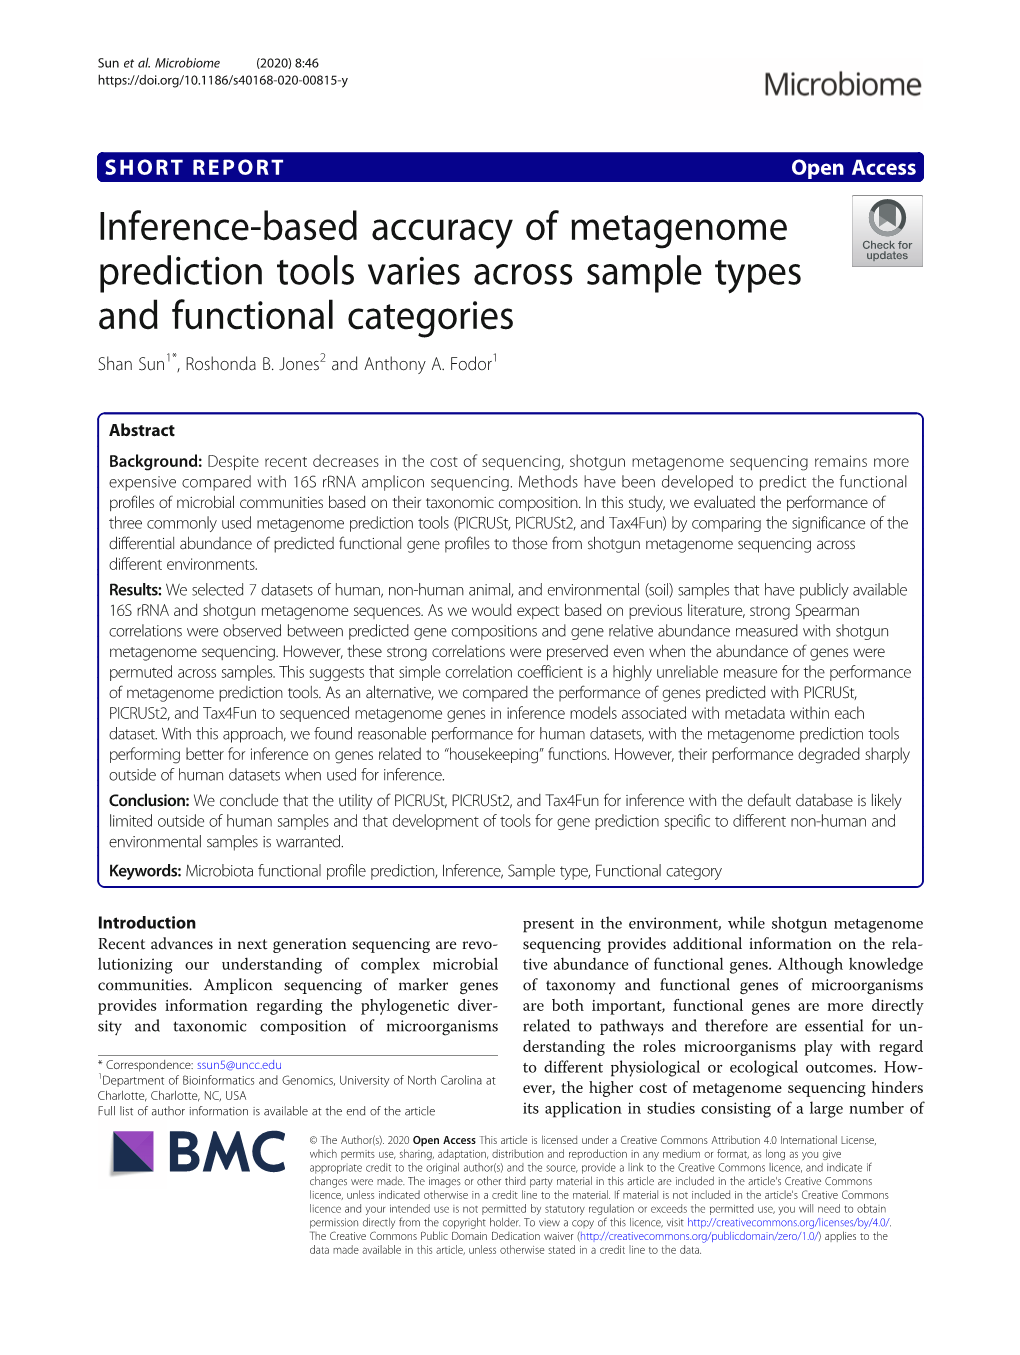 Inference-Based Accuracy of Metagenome Prediction Tools Varies Across Sample Types and Functional Categories Shan Sun1*, Roshonda B